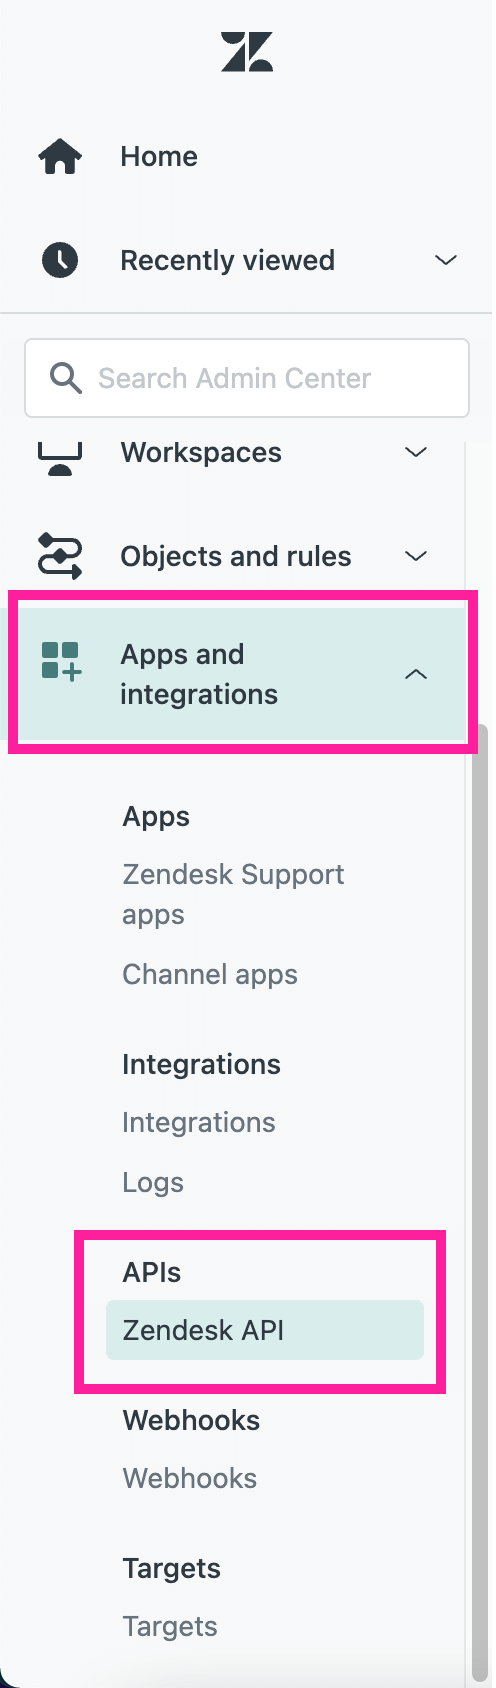 Zendesk admin center menu. Apps and Integrations is selected. Inside that, Zendesk API is selected.